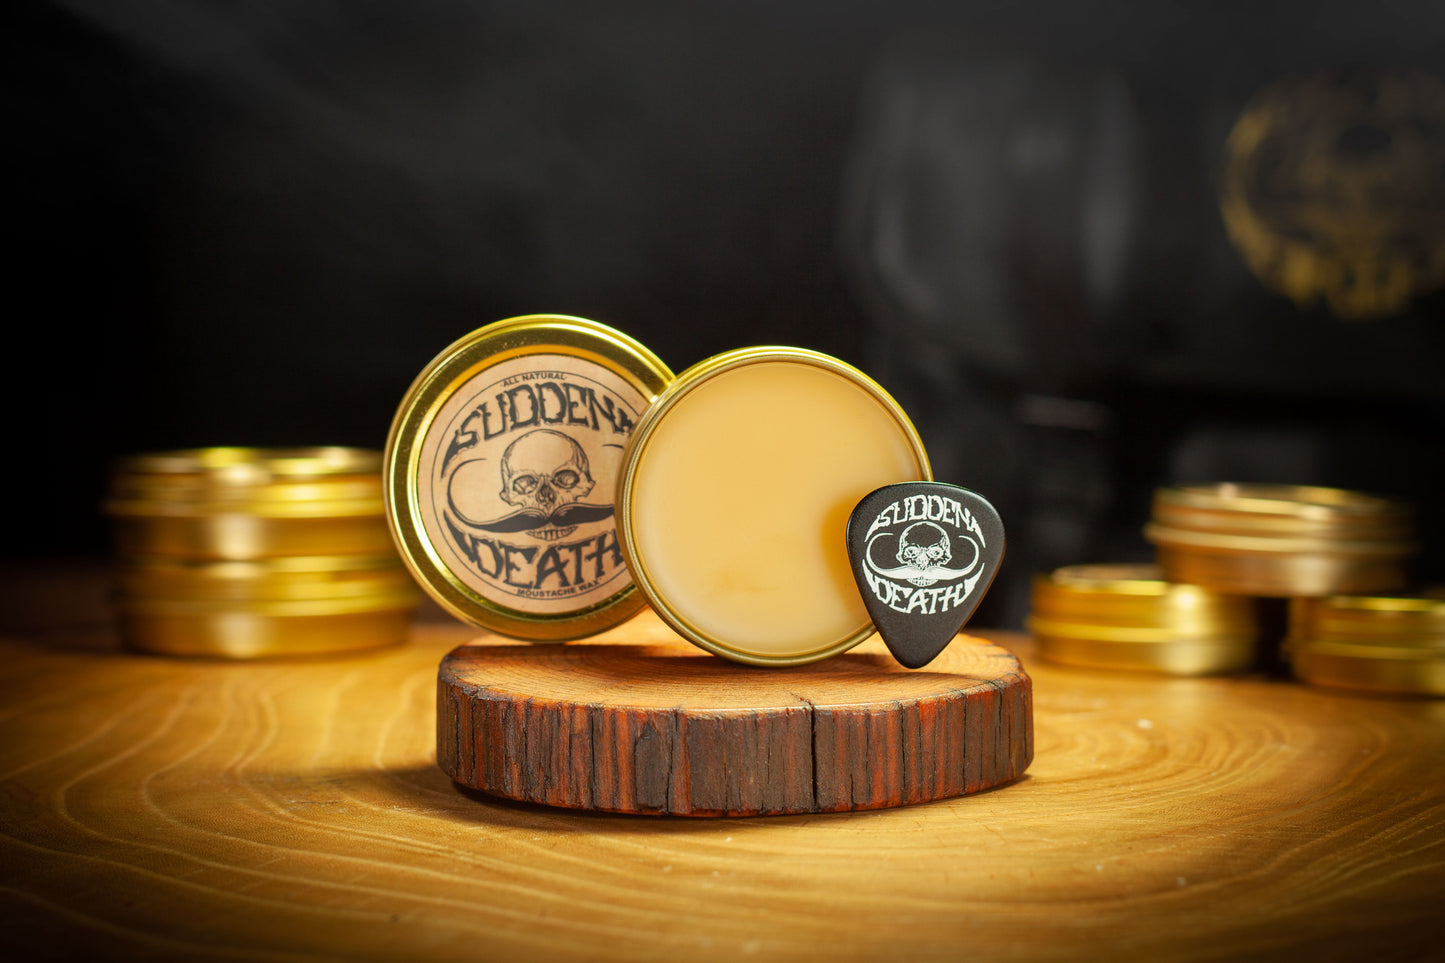 Bone Crusher Extra Strong Extra Firm (1oz) & Sudden Death Strong Hold (No Heat Required - 1oz) Mustache Wax Combo